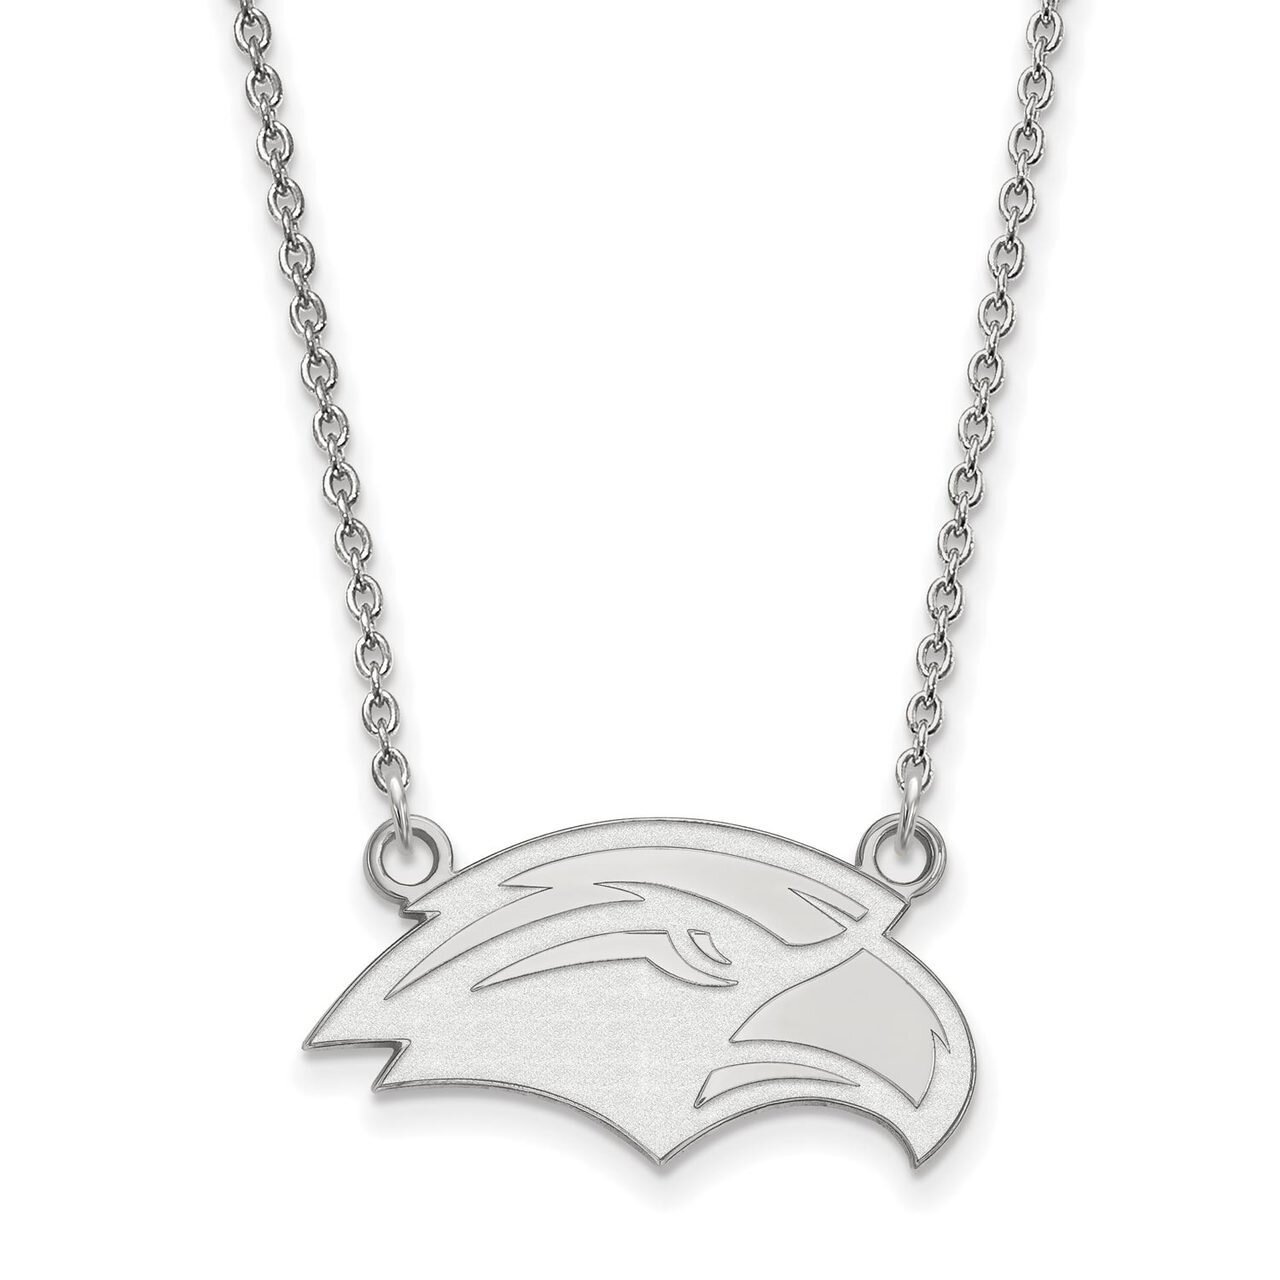 University of Southern Mississippi Small Pendant with Chain Necklace 10k White Gold 1W007USM-18